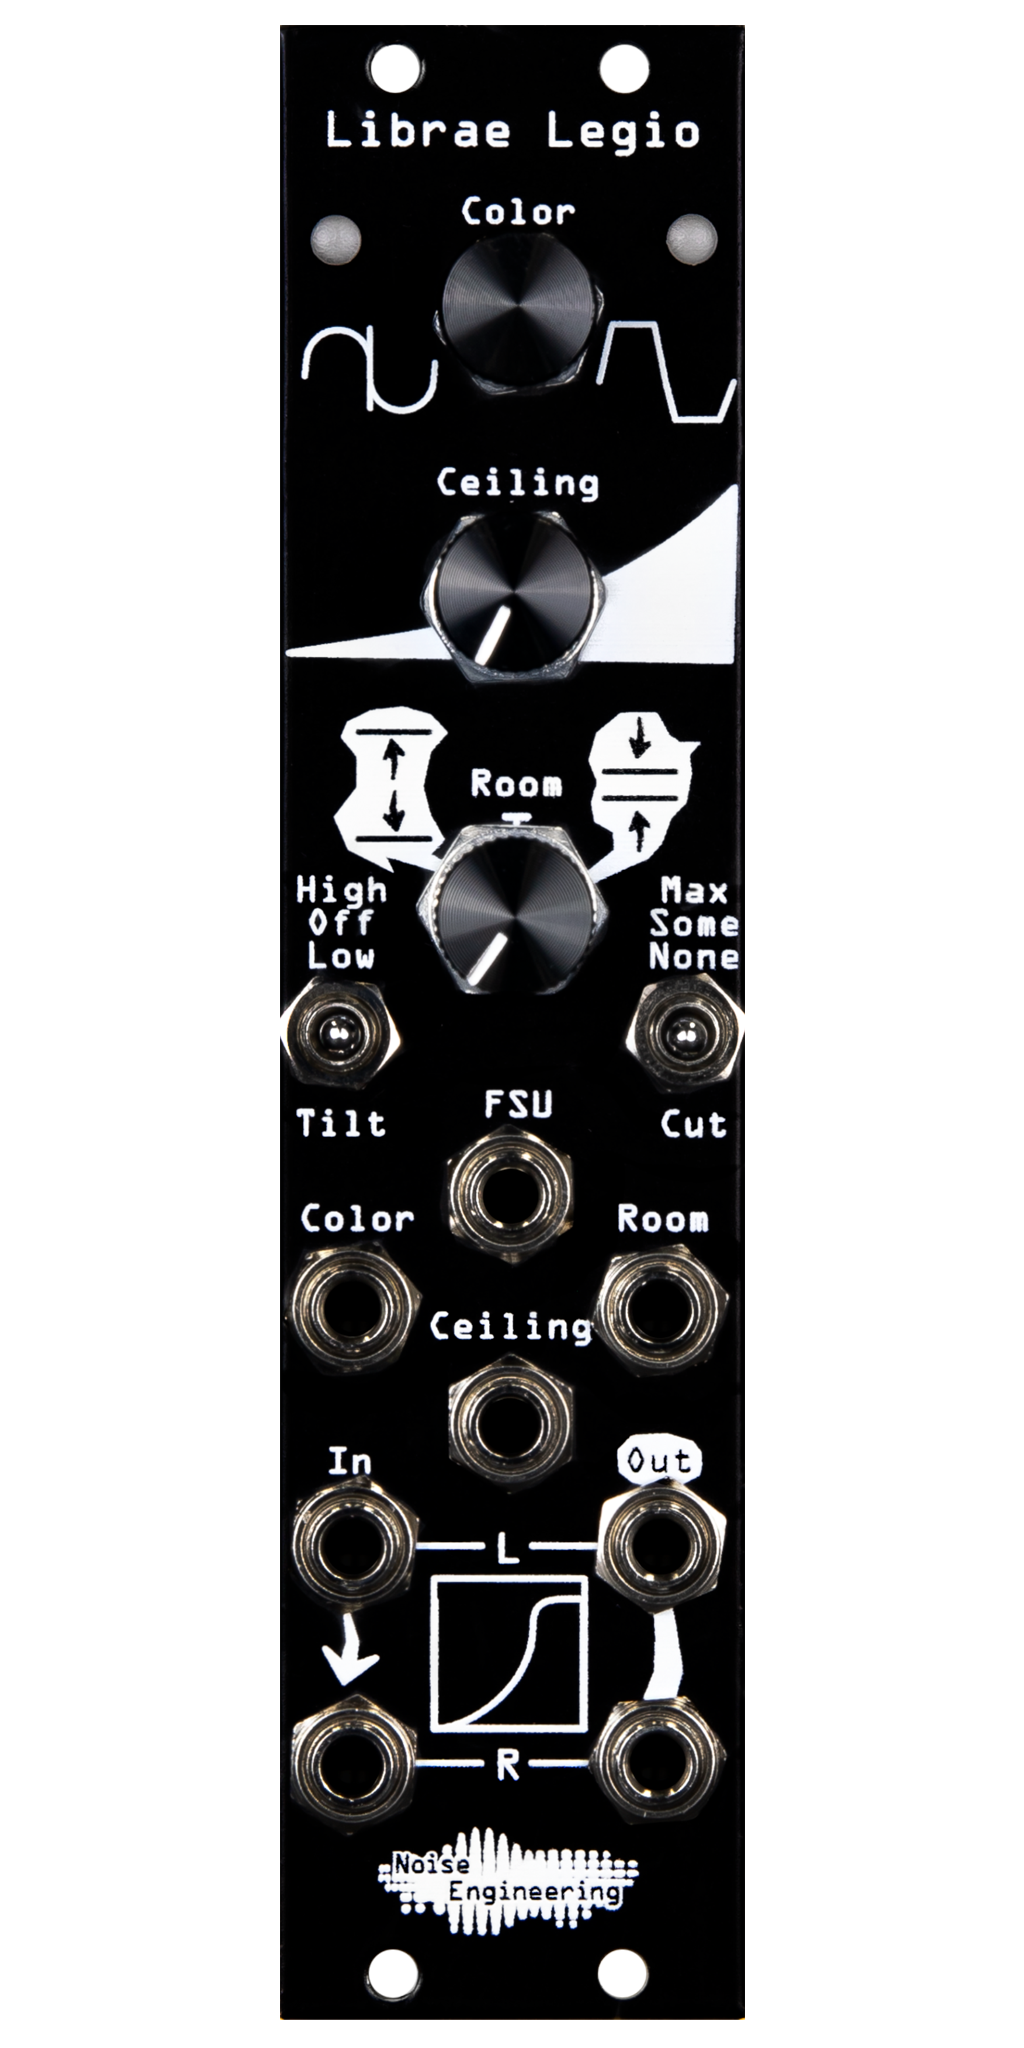 The dynamics processor of your dreams: stereo-in, stereo-out on a DSP/oscillator platform for Eurorack in black. | Librae Legio and the World of Legio by Noise Engineering